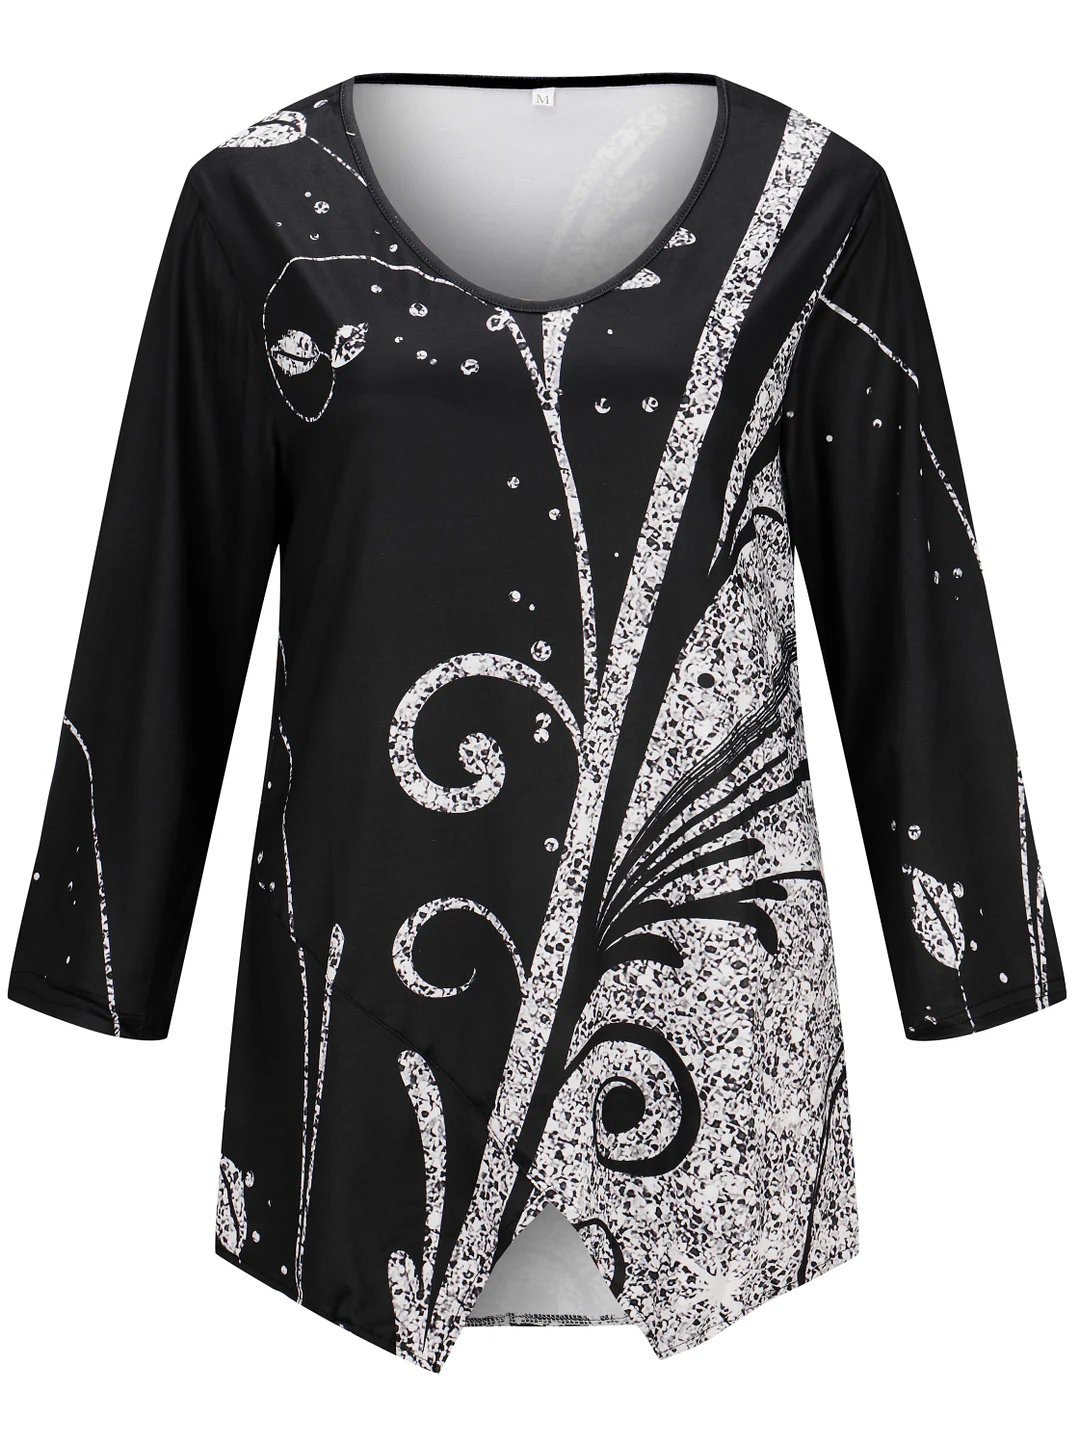 Style & Comfort for Mature Women Women Asymmetrical 3/4 Sleeve Scoop Neck Graphic Printed Top